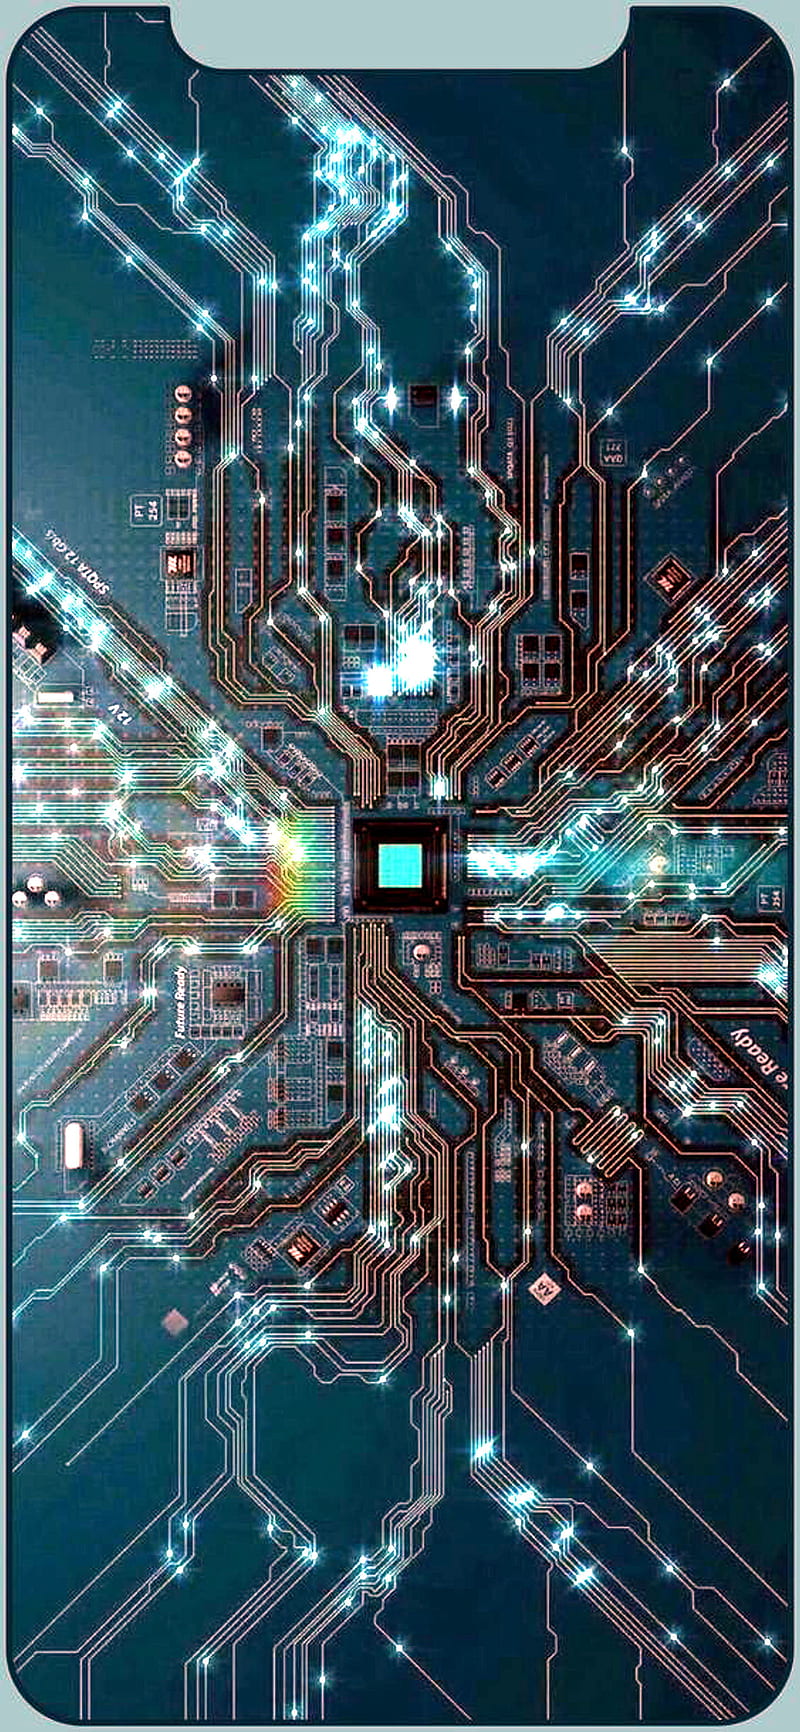 4k Ultra Hd Symbol On Abstract Electronic Circuit Board Television  Technology Concept Of Ultra High Definition